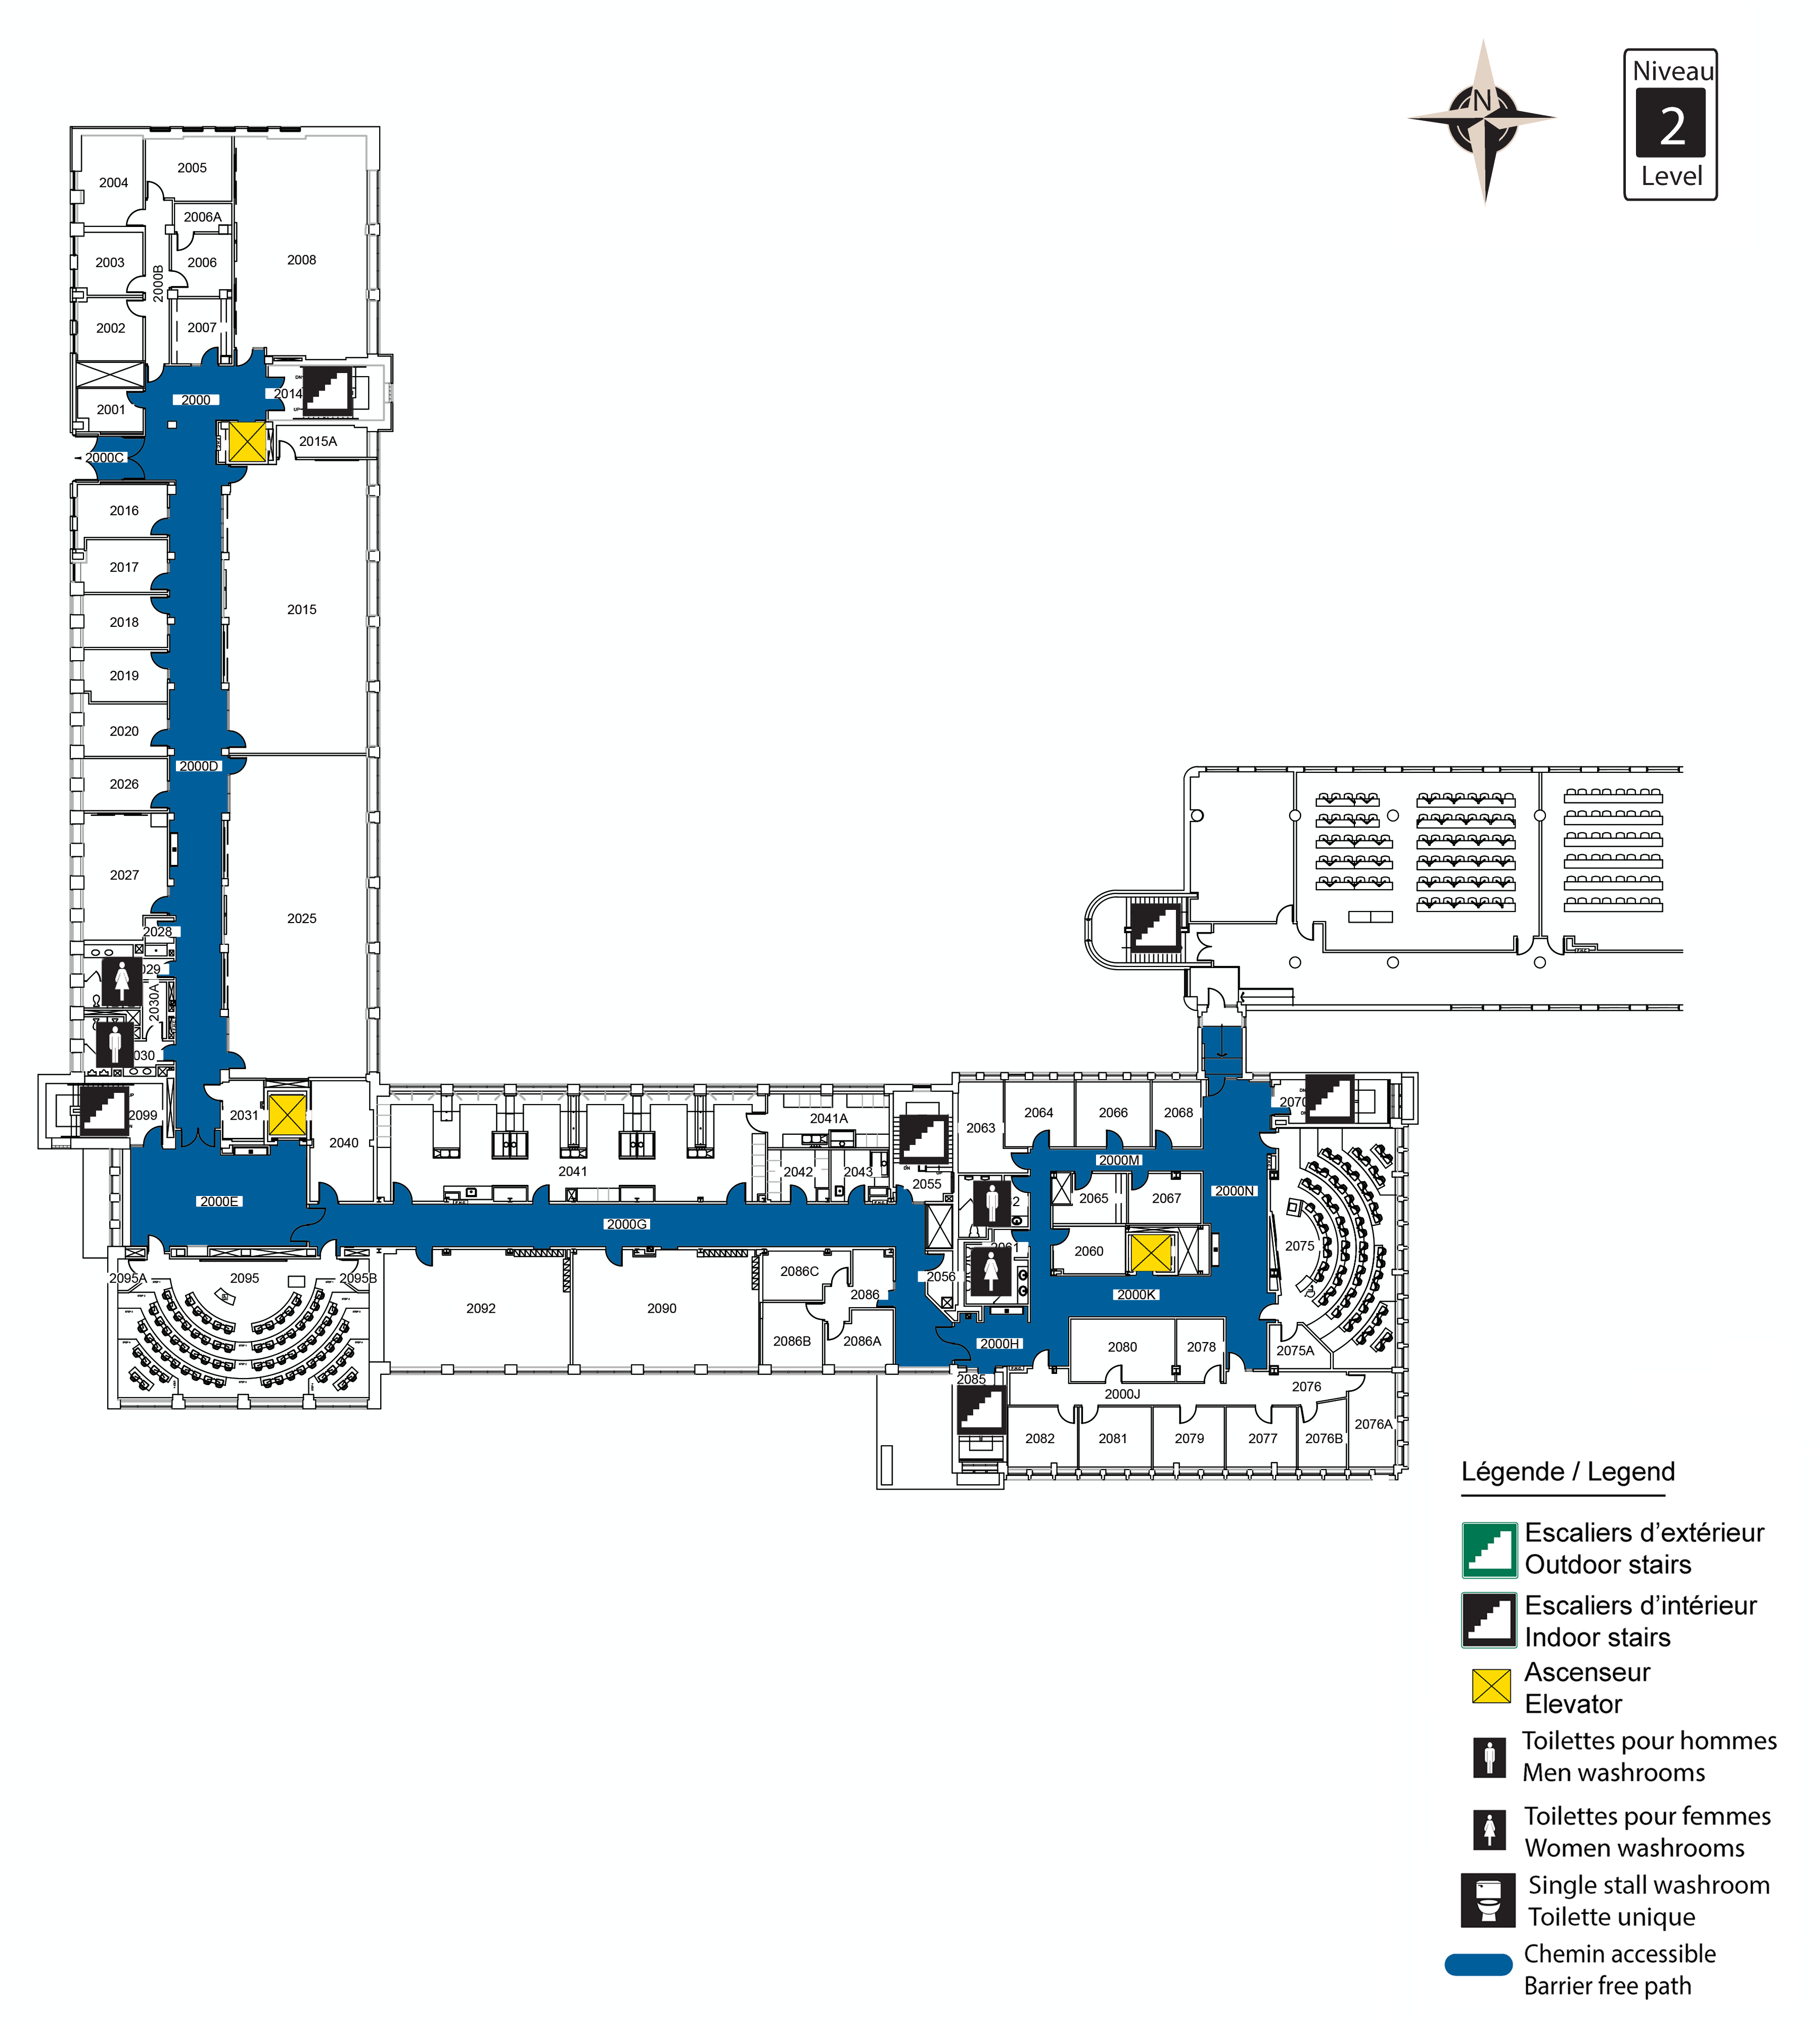 Accessible map of VNR level 2